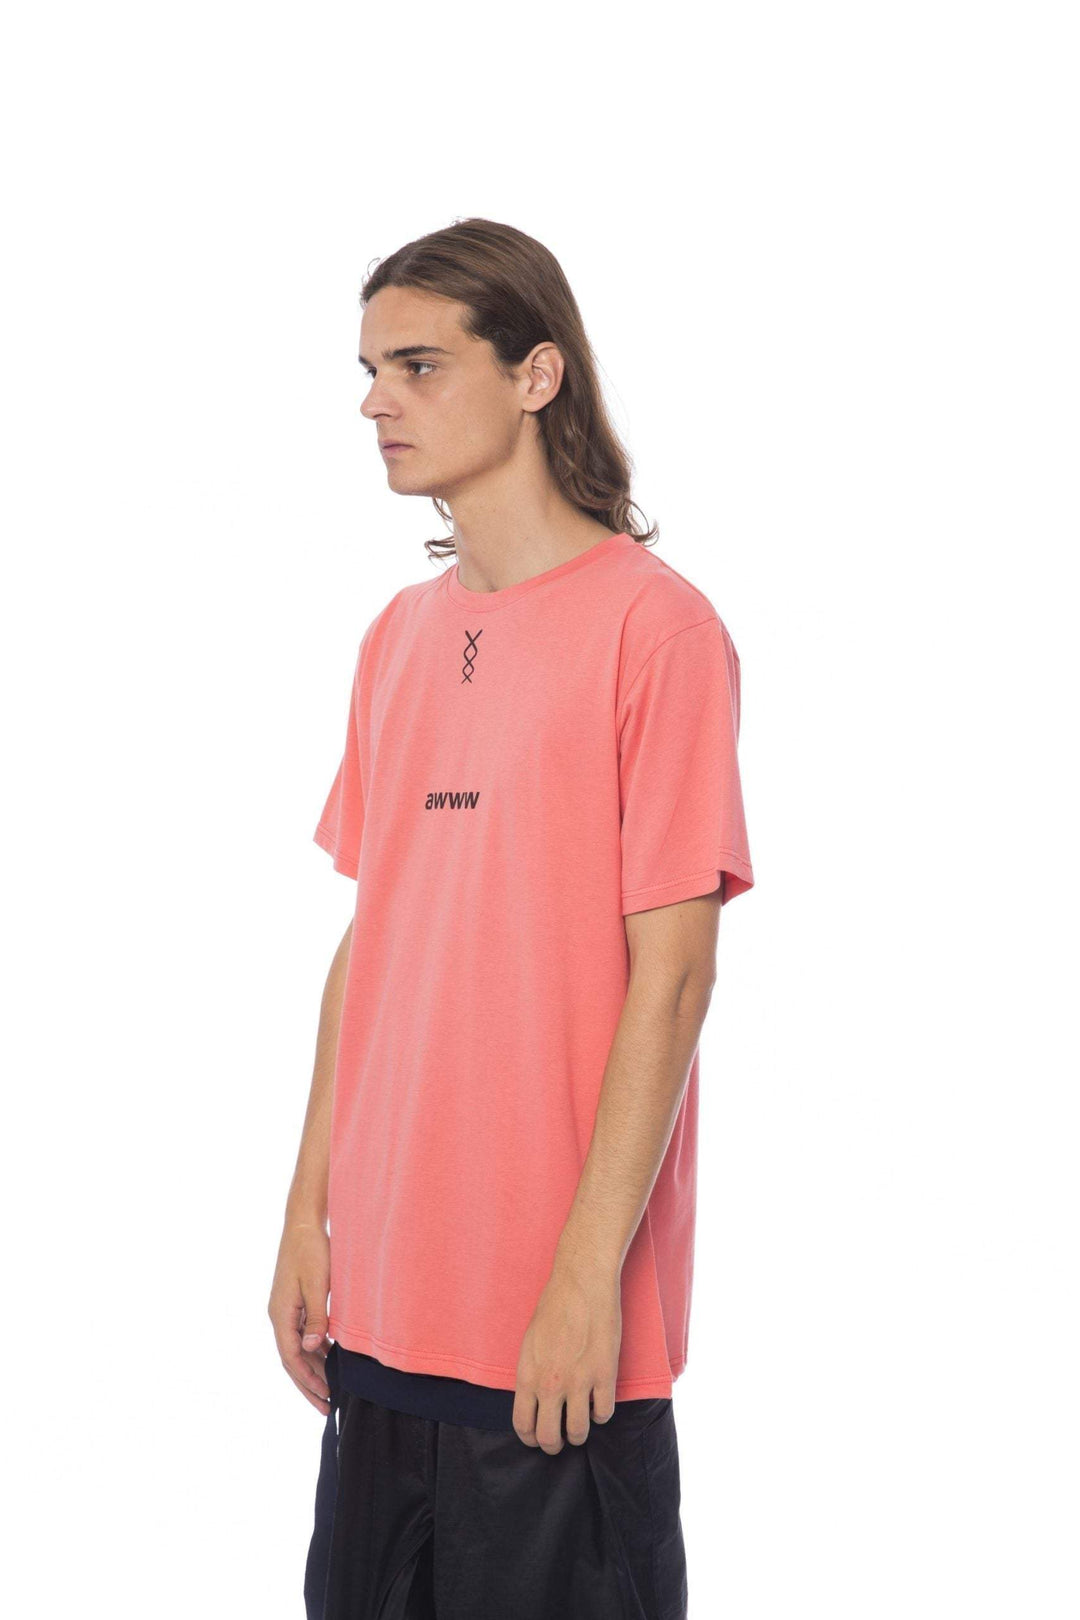 Nicolo Tonetto round neck printed T-shirt #men, feed-color-Pink, feed-gender-adult, feed-gender-male, L, M, Nicolo Tonetto, Pink, T-shirts - Men - Clothing at SEYMAYKA